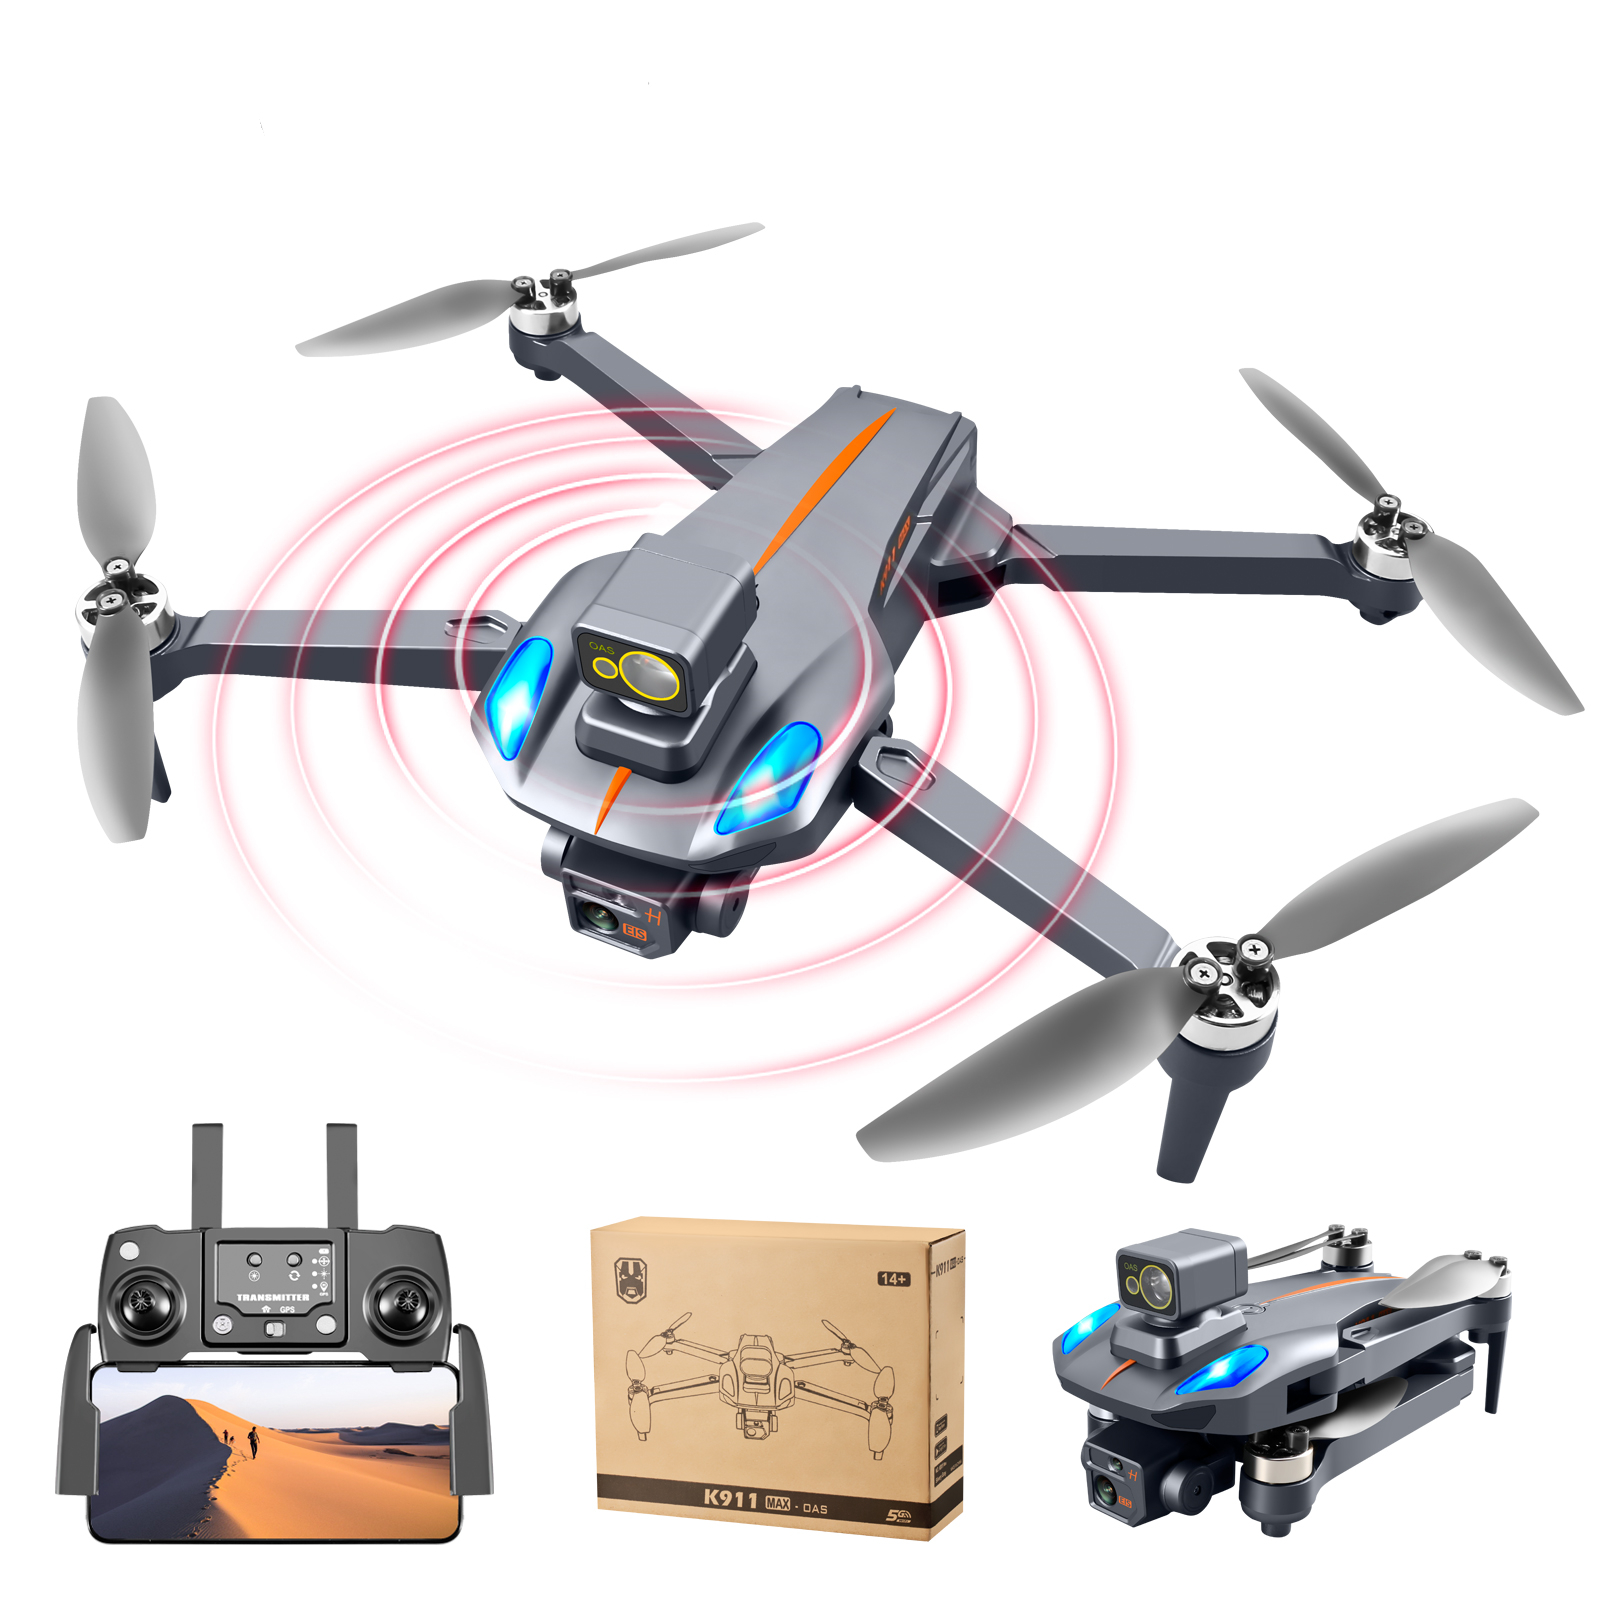 K911 Max 5G WIFI FPV GPS with 8K ESC Dual Camera 360° Obstacle Avoidance Optical Flow Positioning Brushless 225g Foldable RC Drone Quadcopter RTF 1